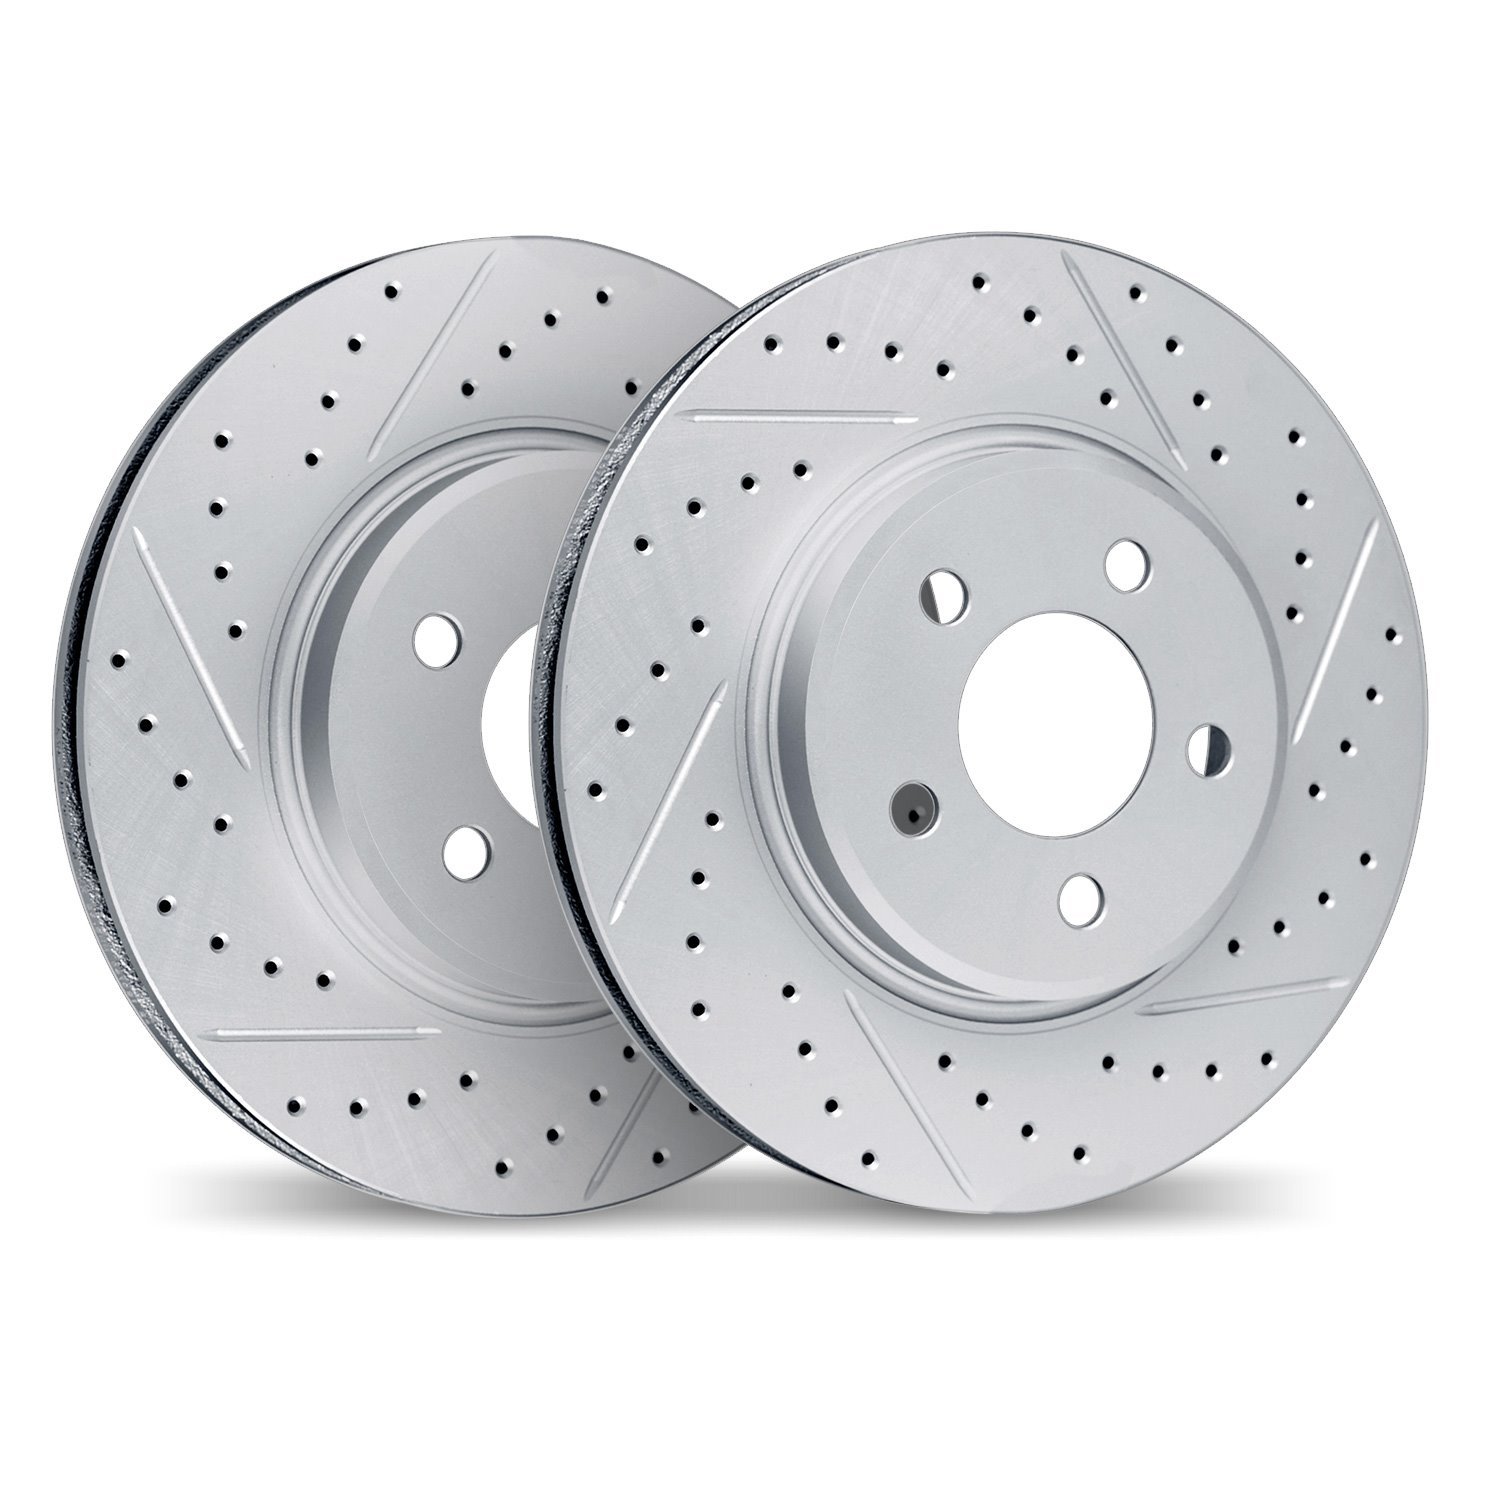 2002-58005 Geoperformance Drilled/Slotted Brake Rotors, Fits Select Acura/Honda, Position: Front